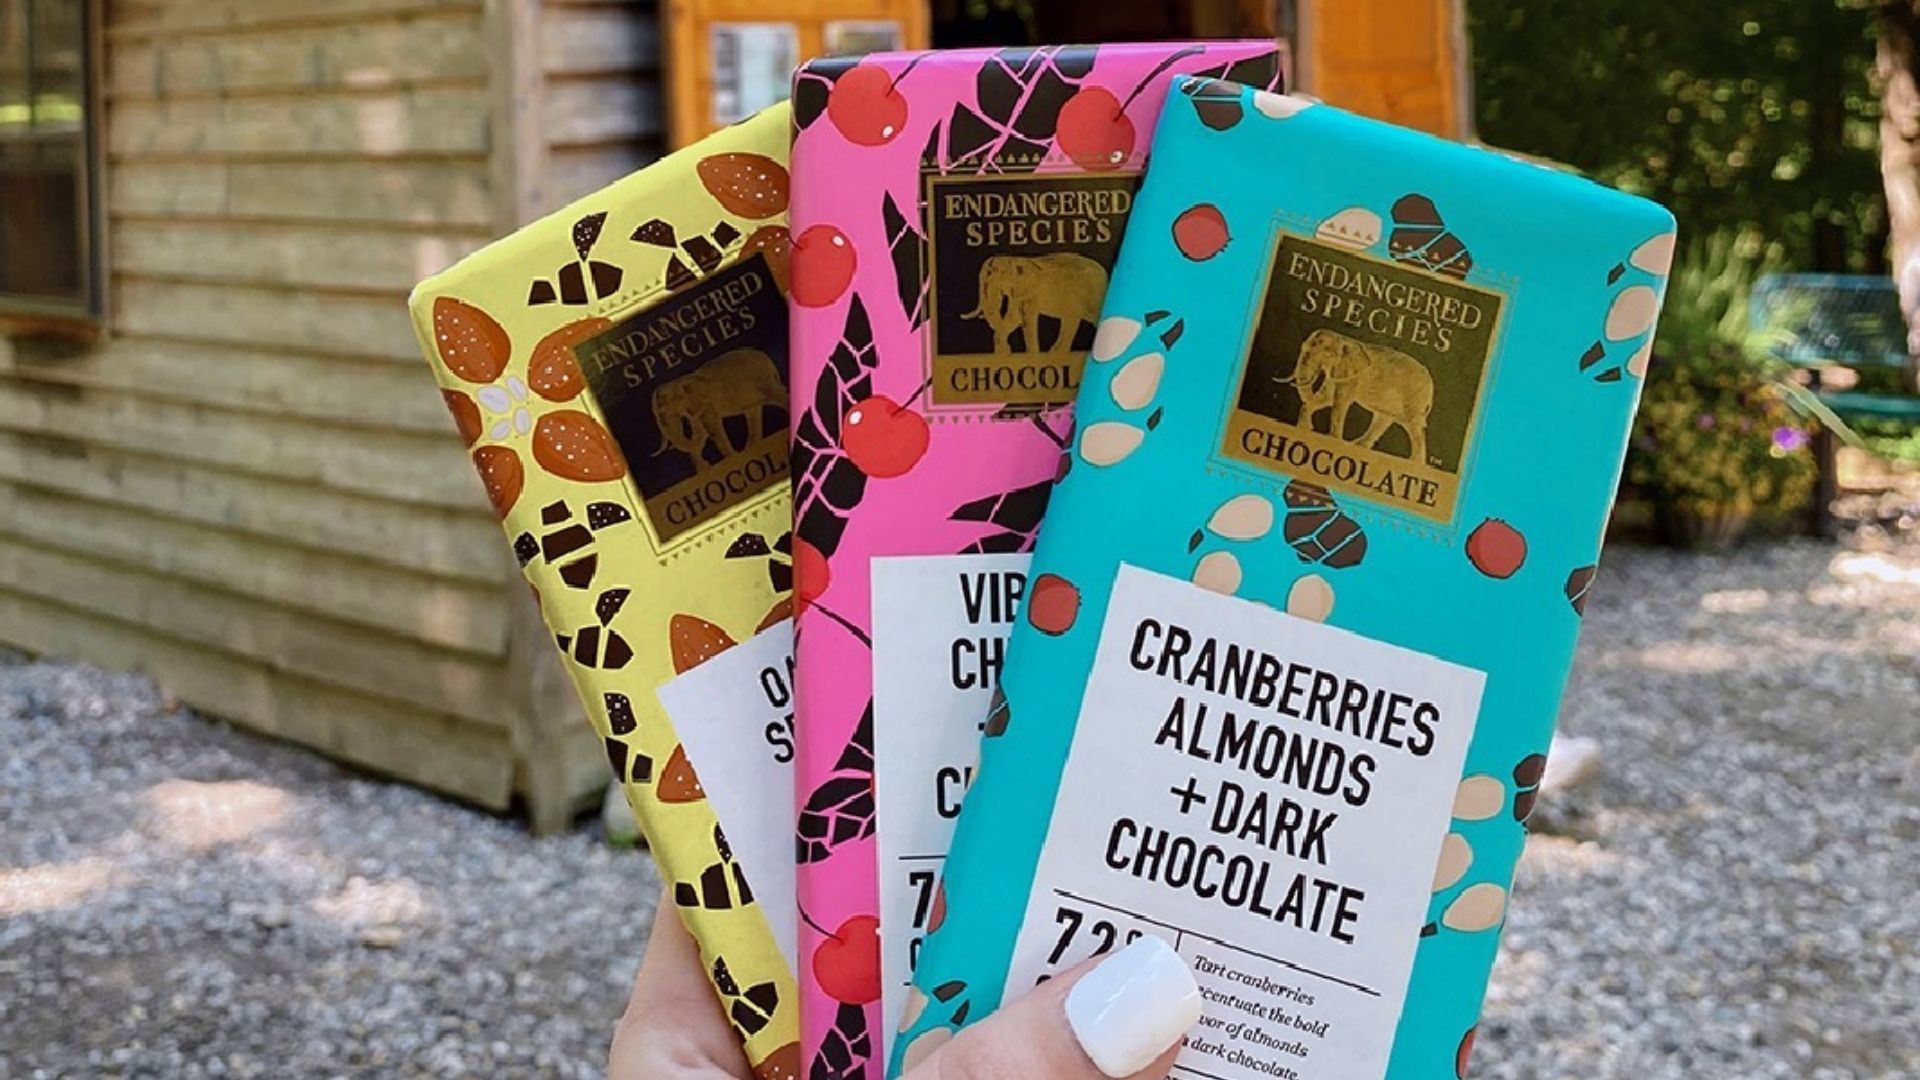 Sustainable chocolate: Endangered Species Chocolate 